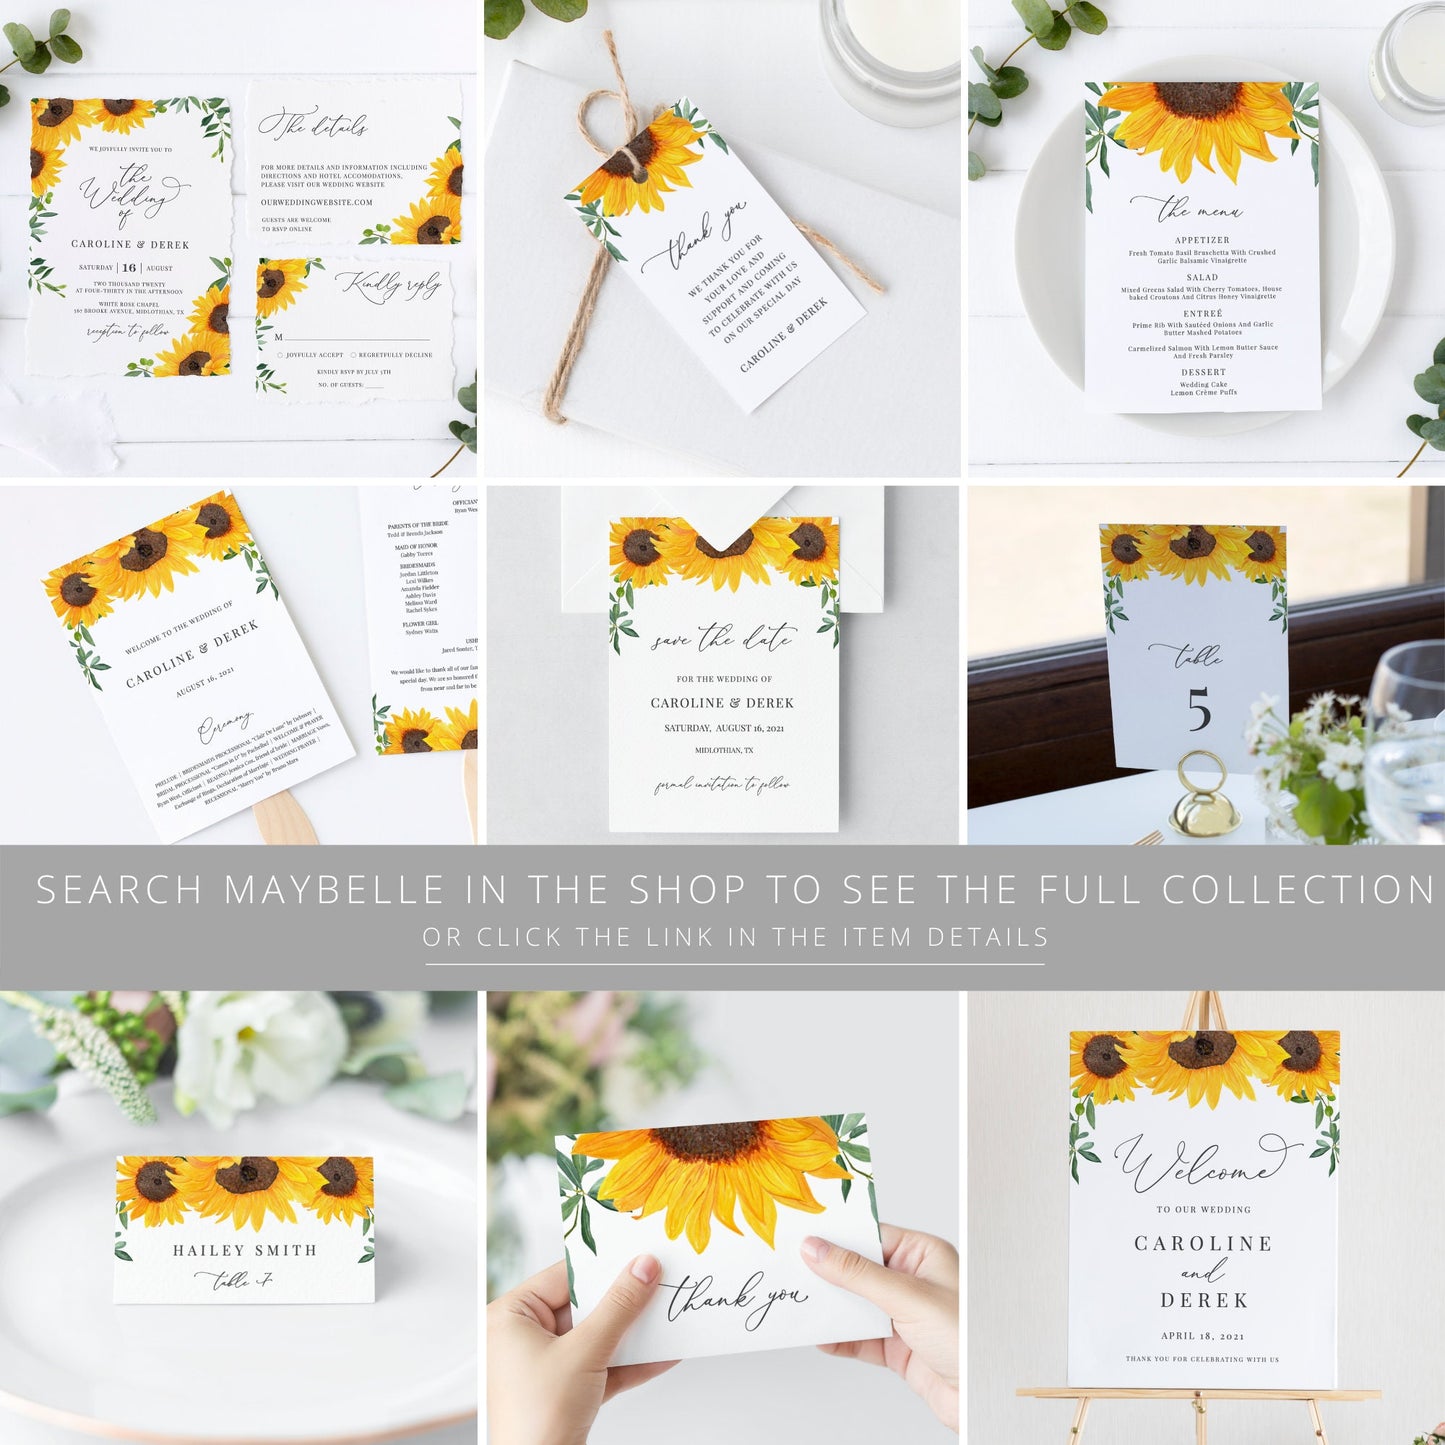 Editable   Brunch and Bubbly Bridal Shower Invitation Rustic Sunflower Bridal Shower Invite Template